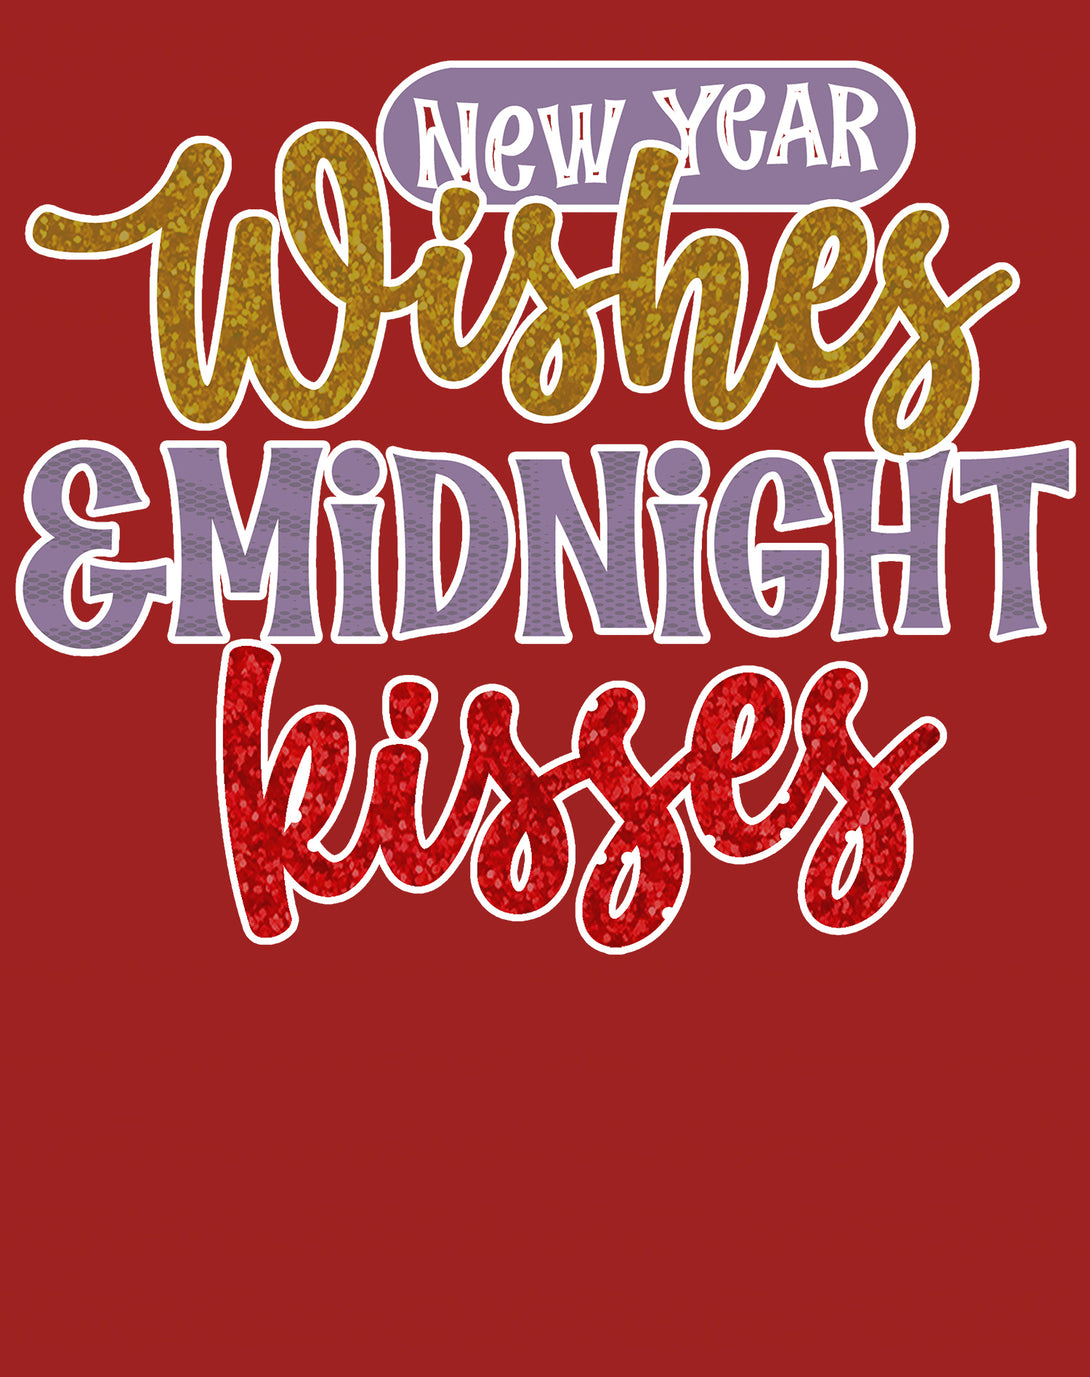 NYE New Year Wishes Midnight Kisses Eve Party Cute Couples Men's T-Shirt Red - Urban Species Design Close Up